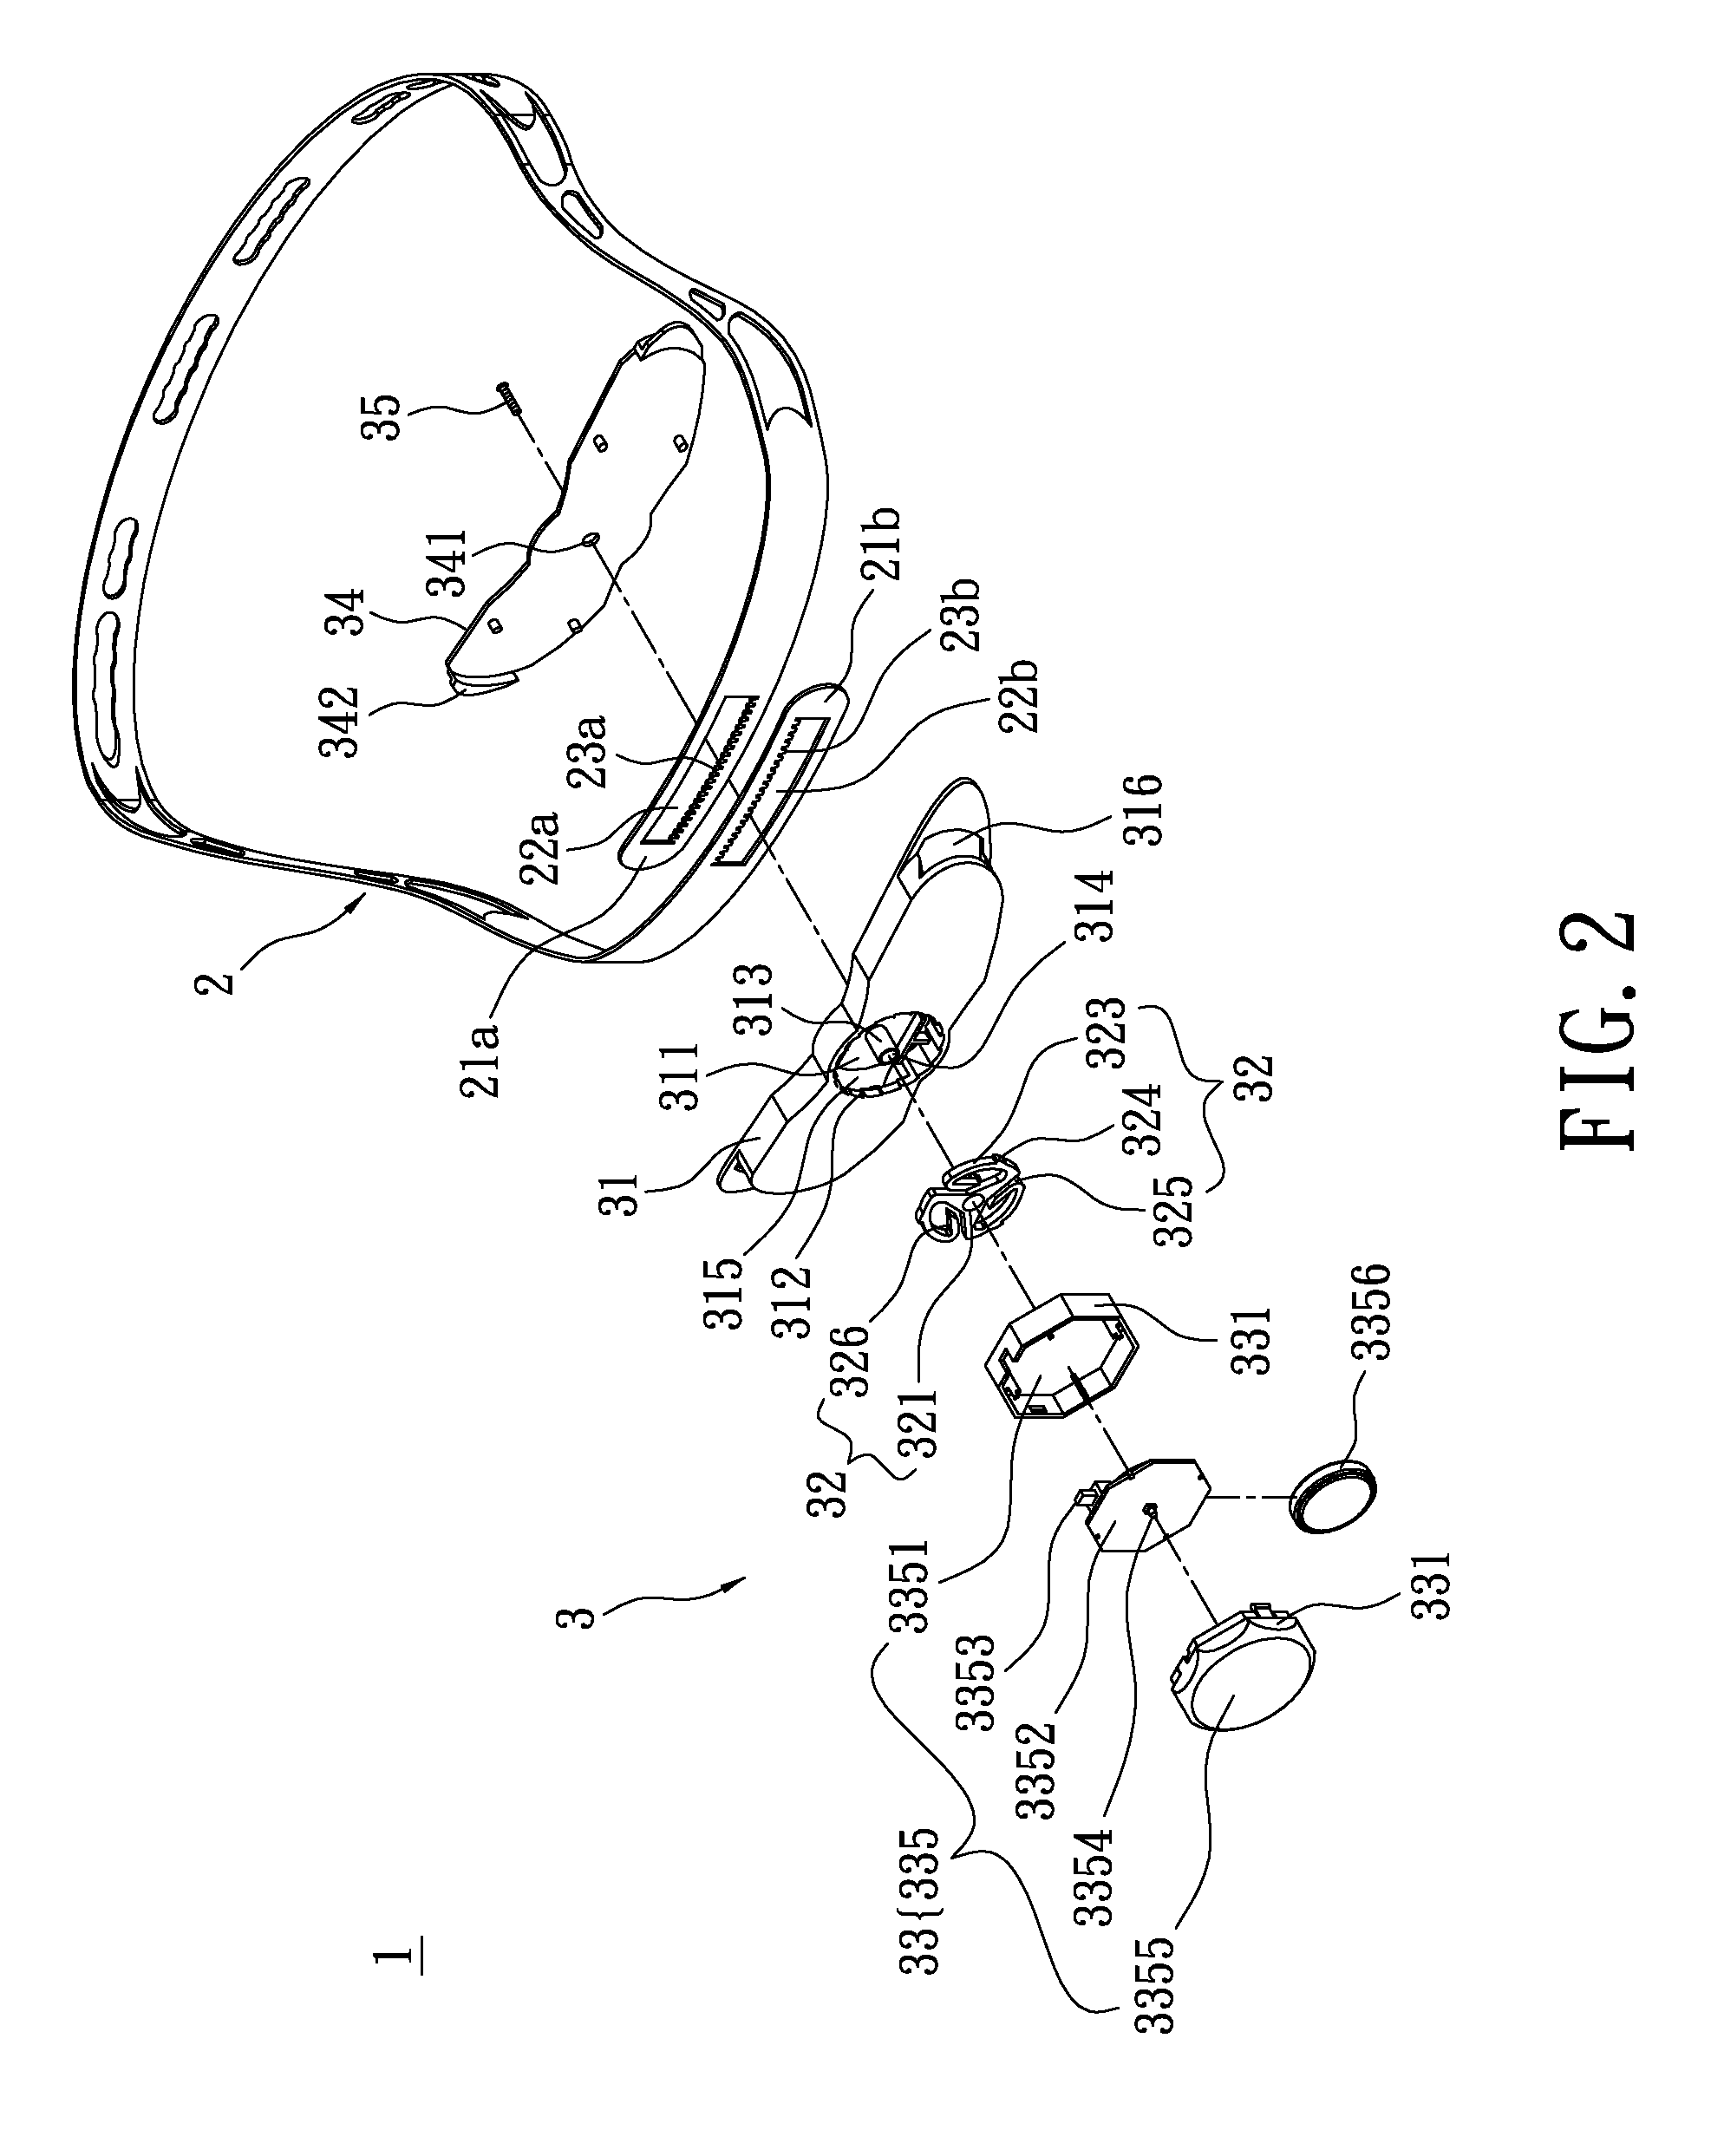 Hat band structure